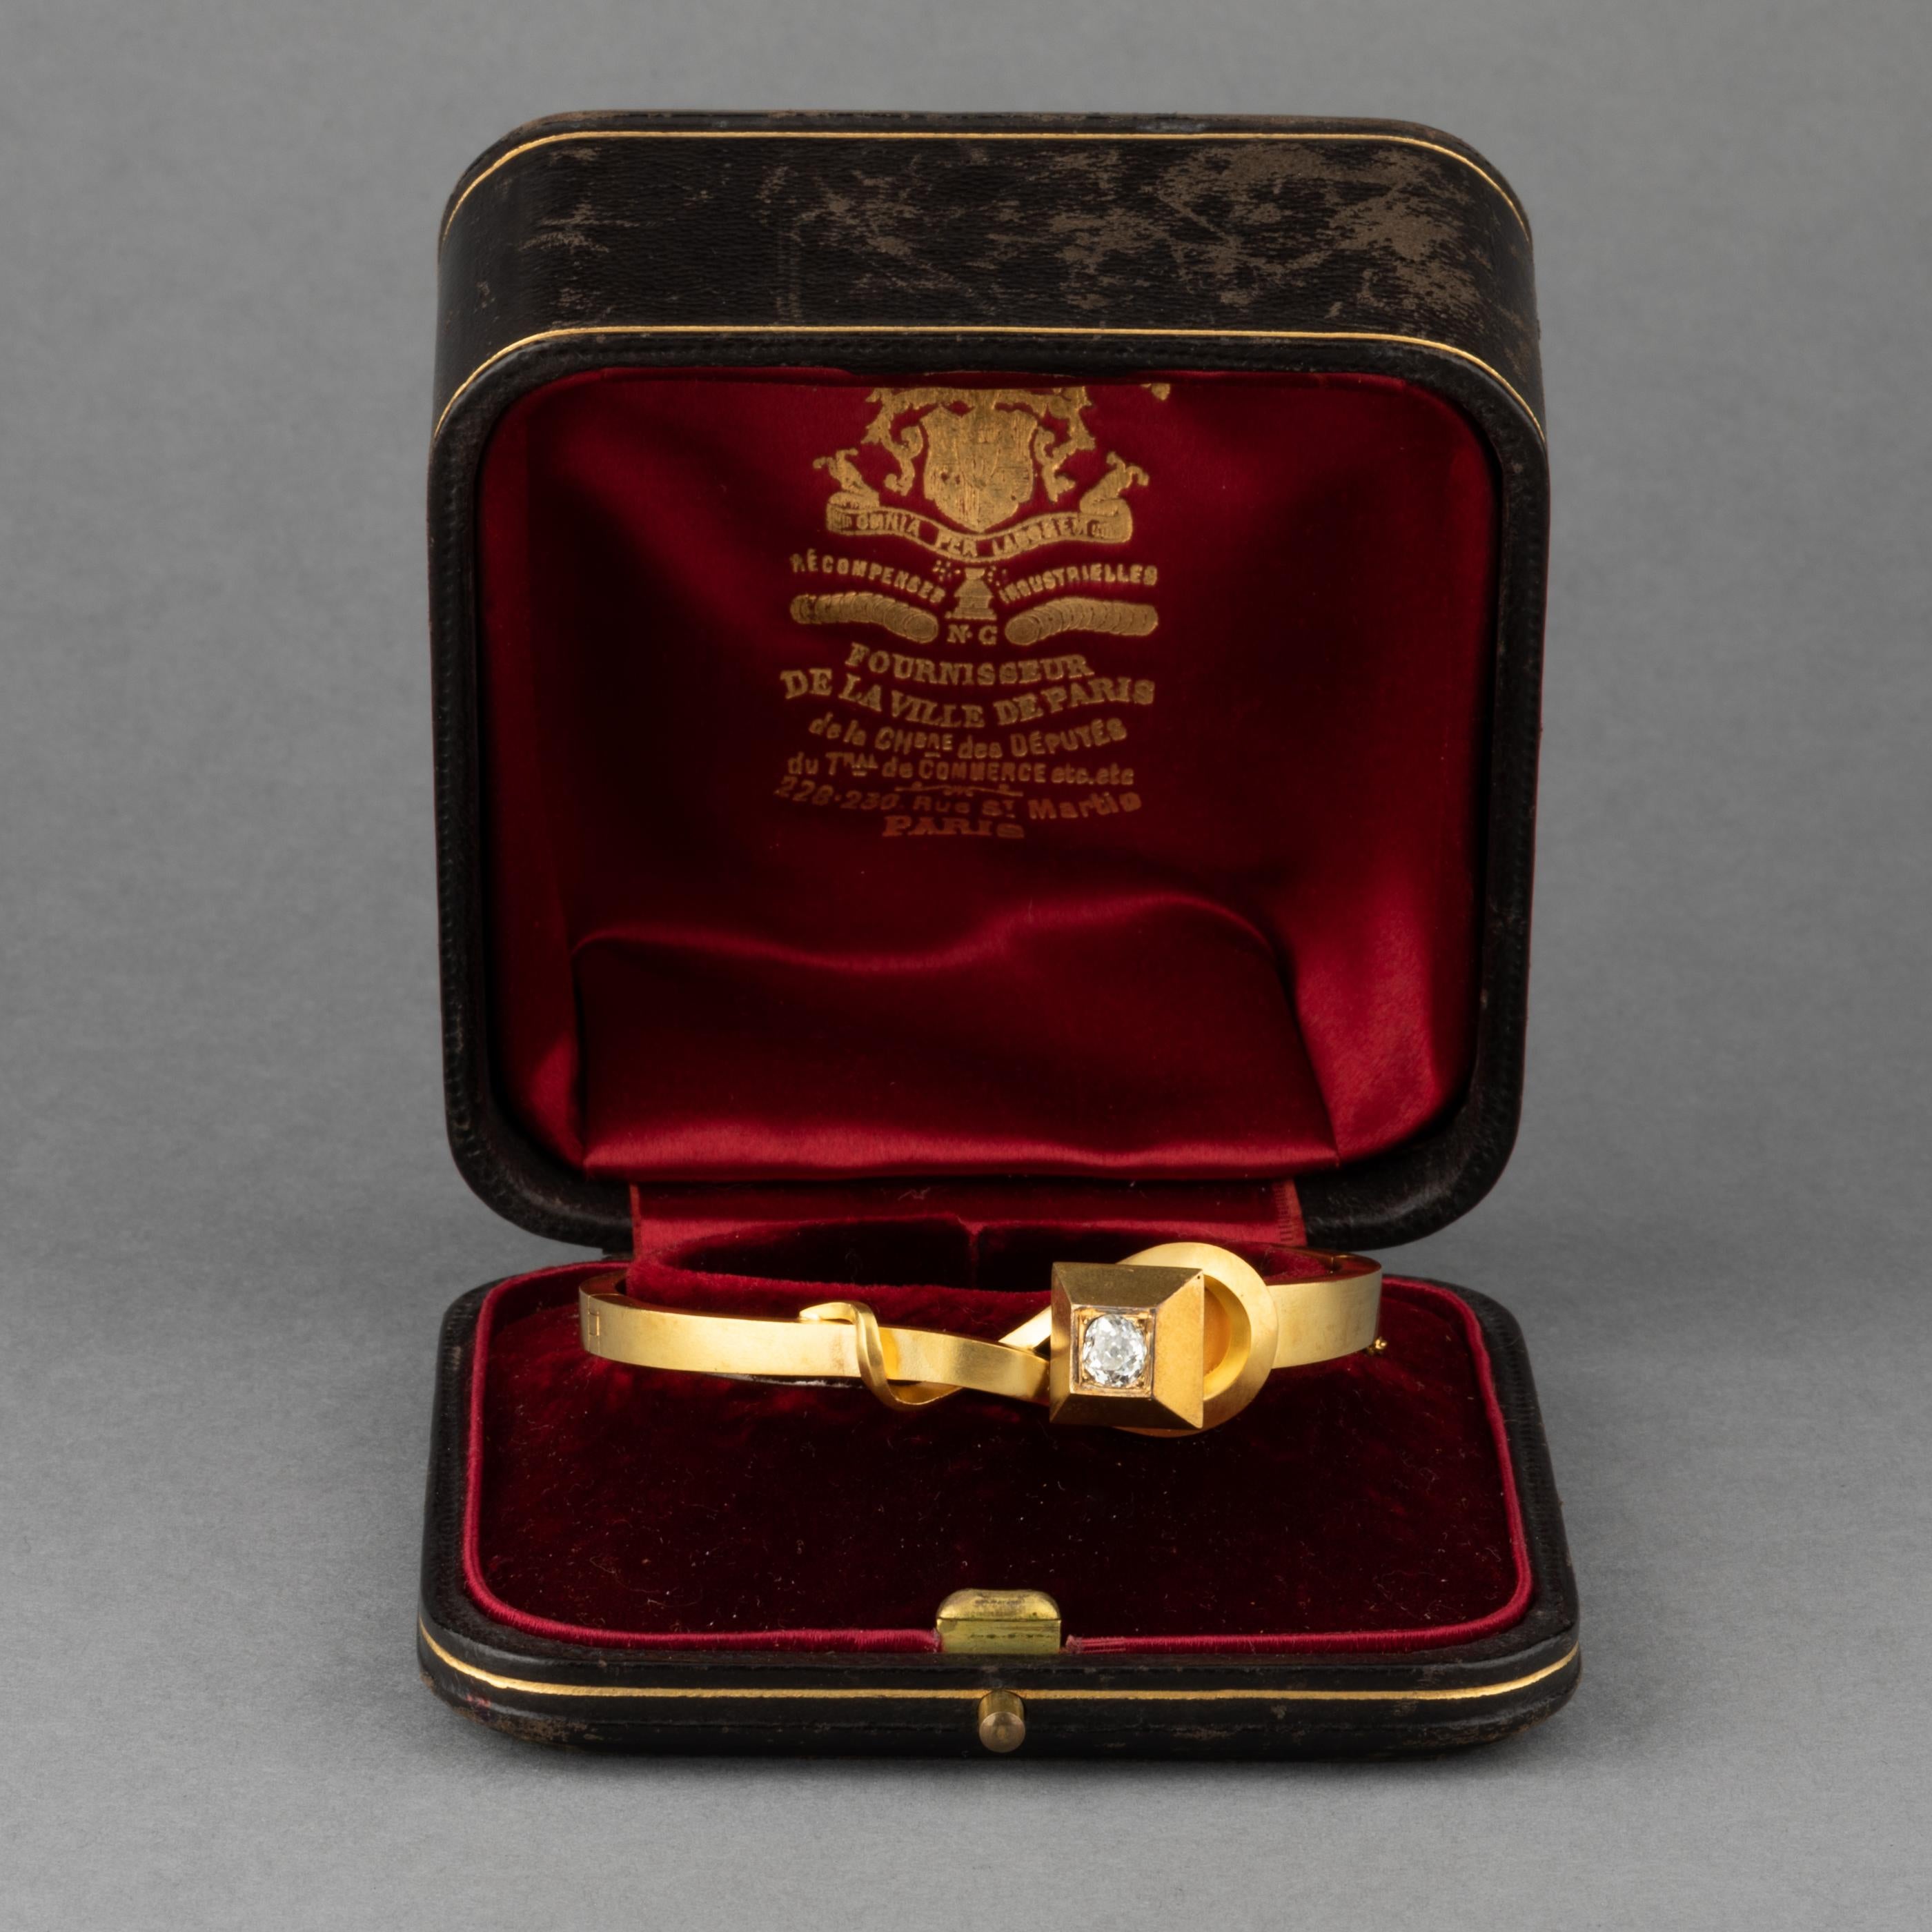 A very beautiful jewel, made in France. circa 1870/1880 by Constantin Detouche, in its original boxe.
It is made in yellow gold 18 k and set with with a quality Old European cut diamond of approximately 0.55 carats. Hallmarks for gold; eagle head